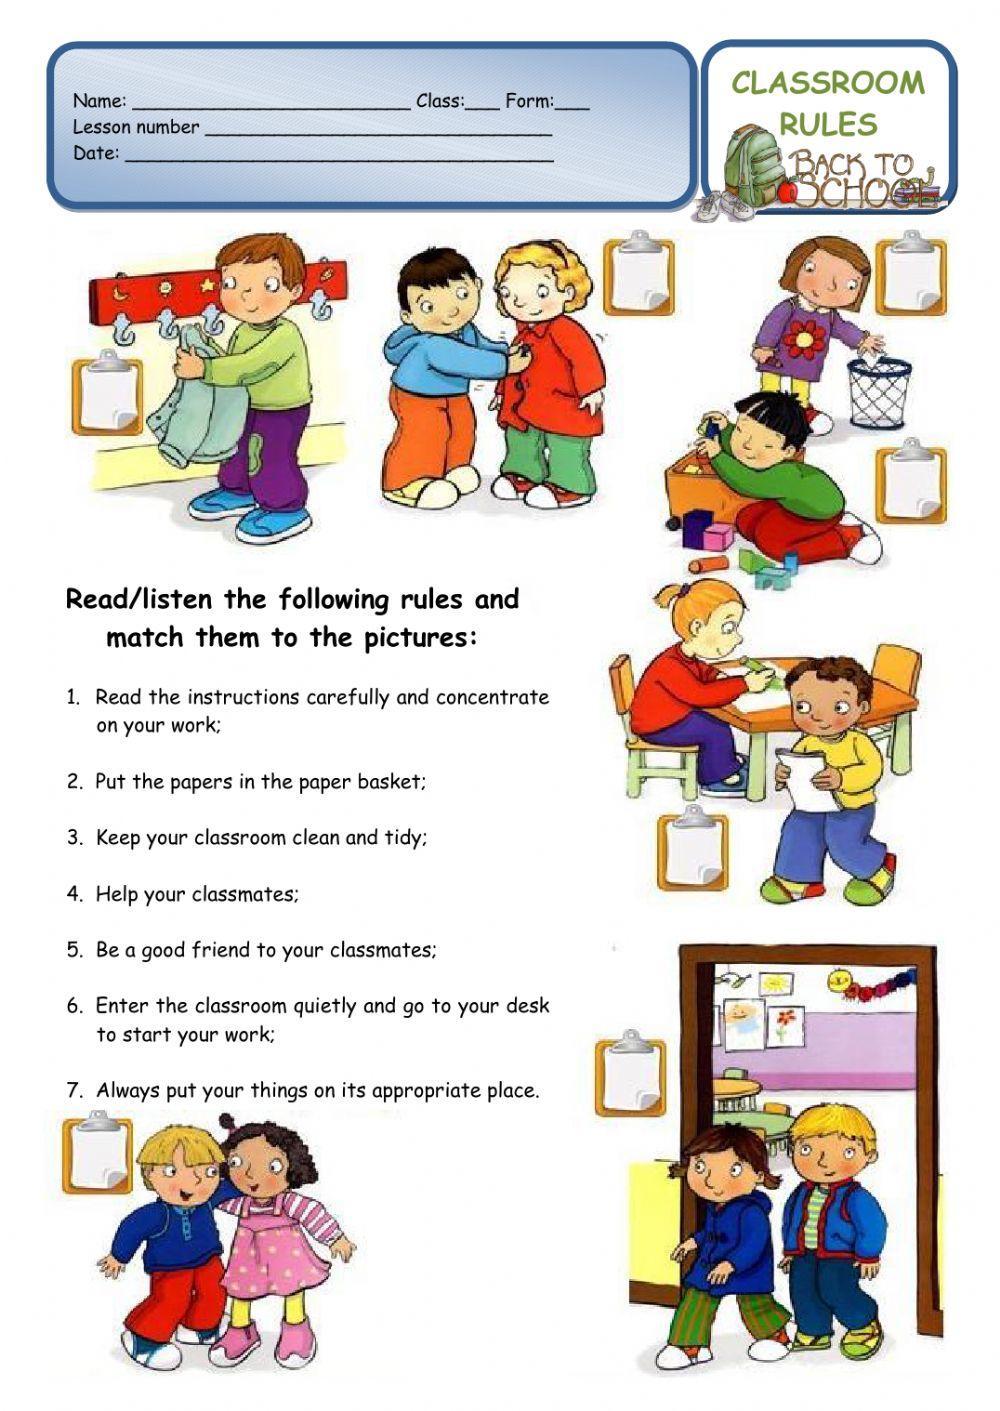 CLASSROOM RULES - a back to school worksheet